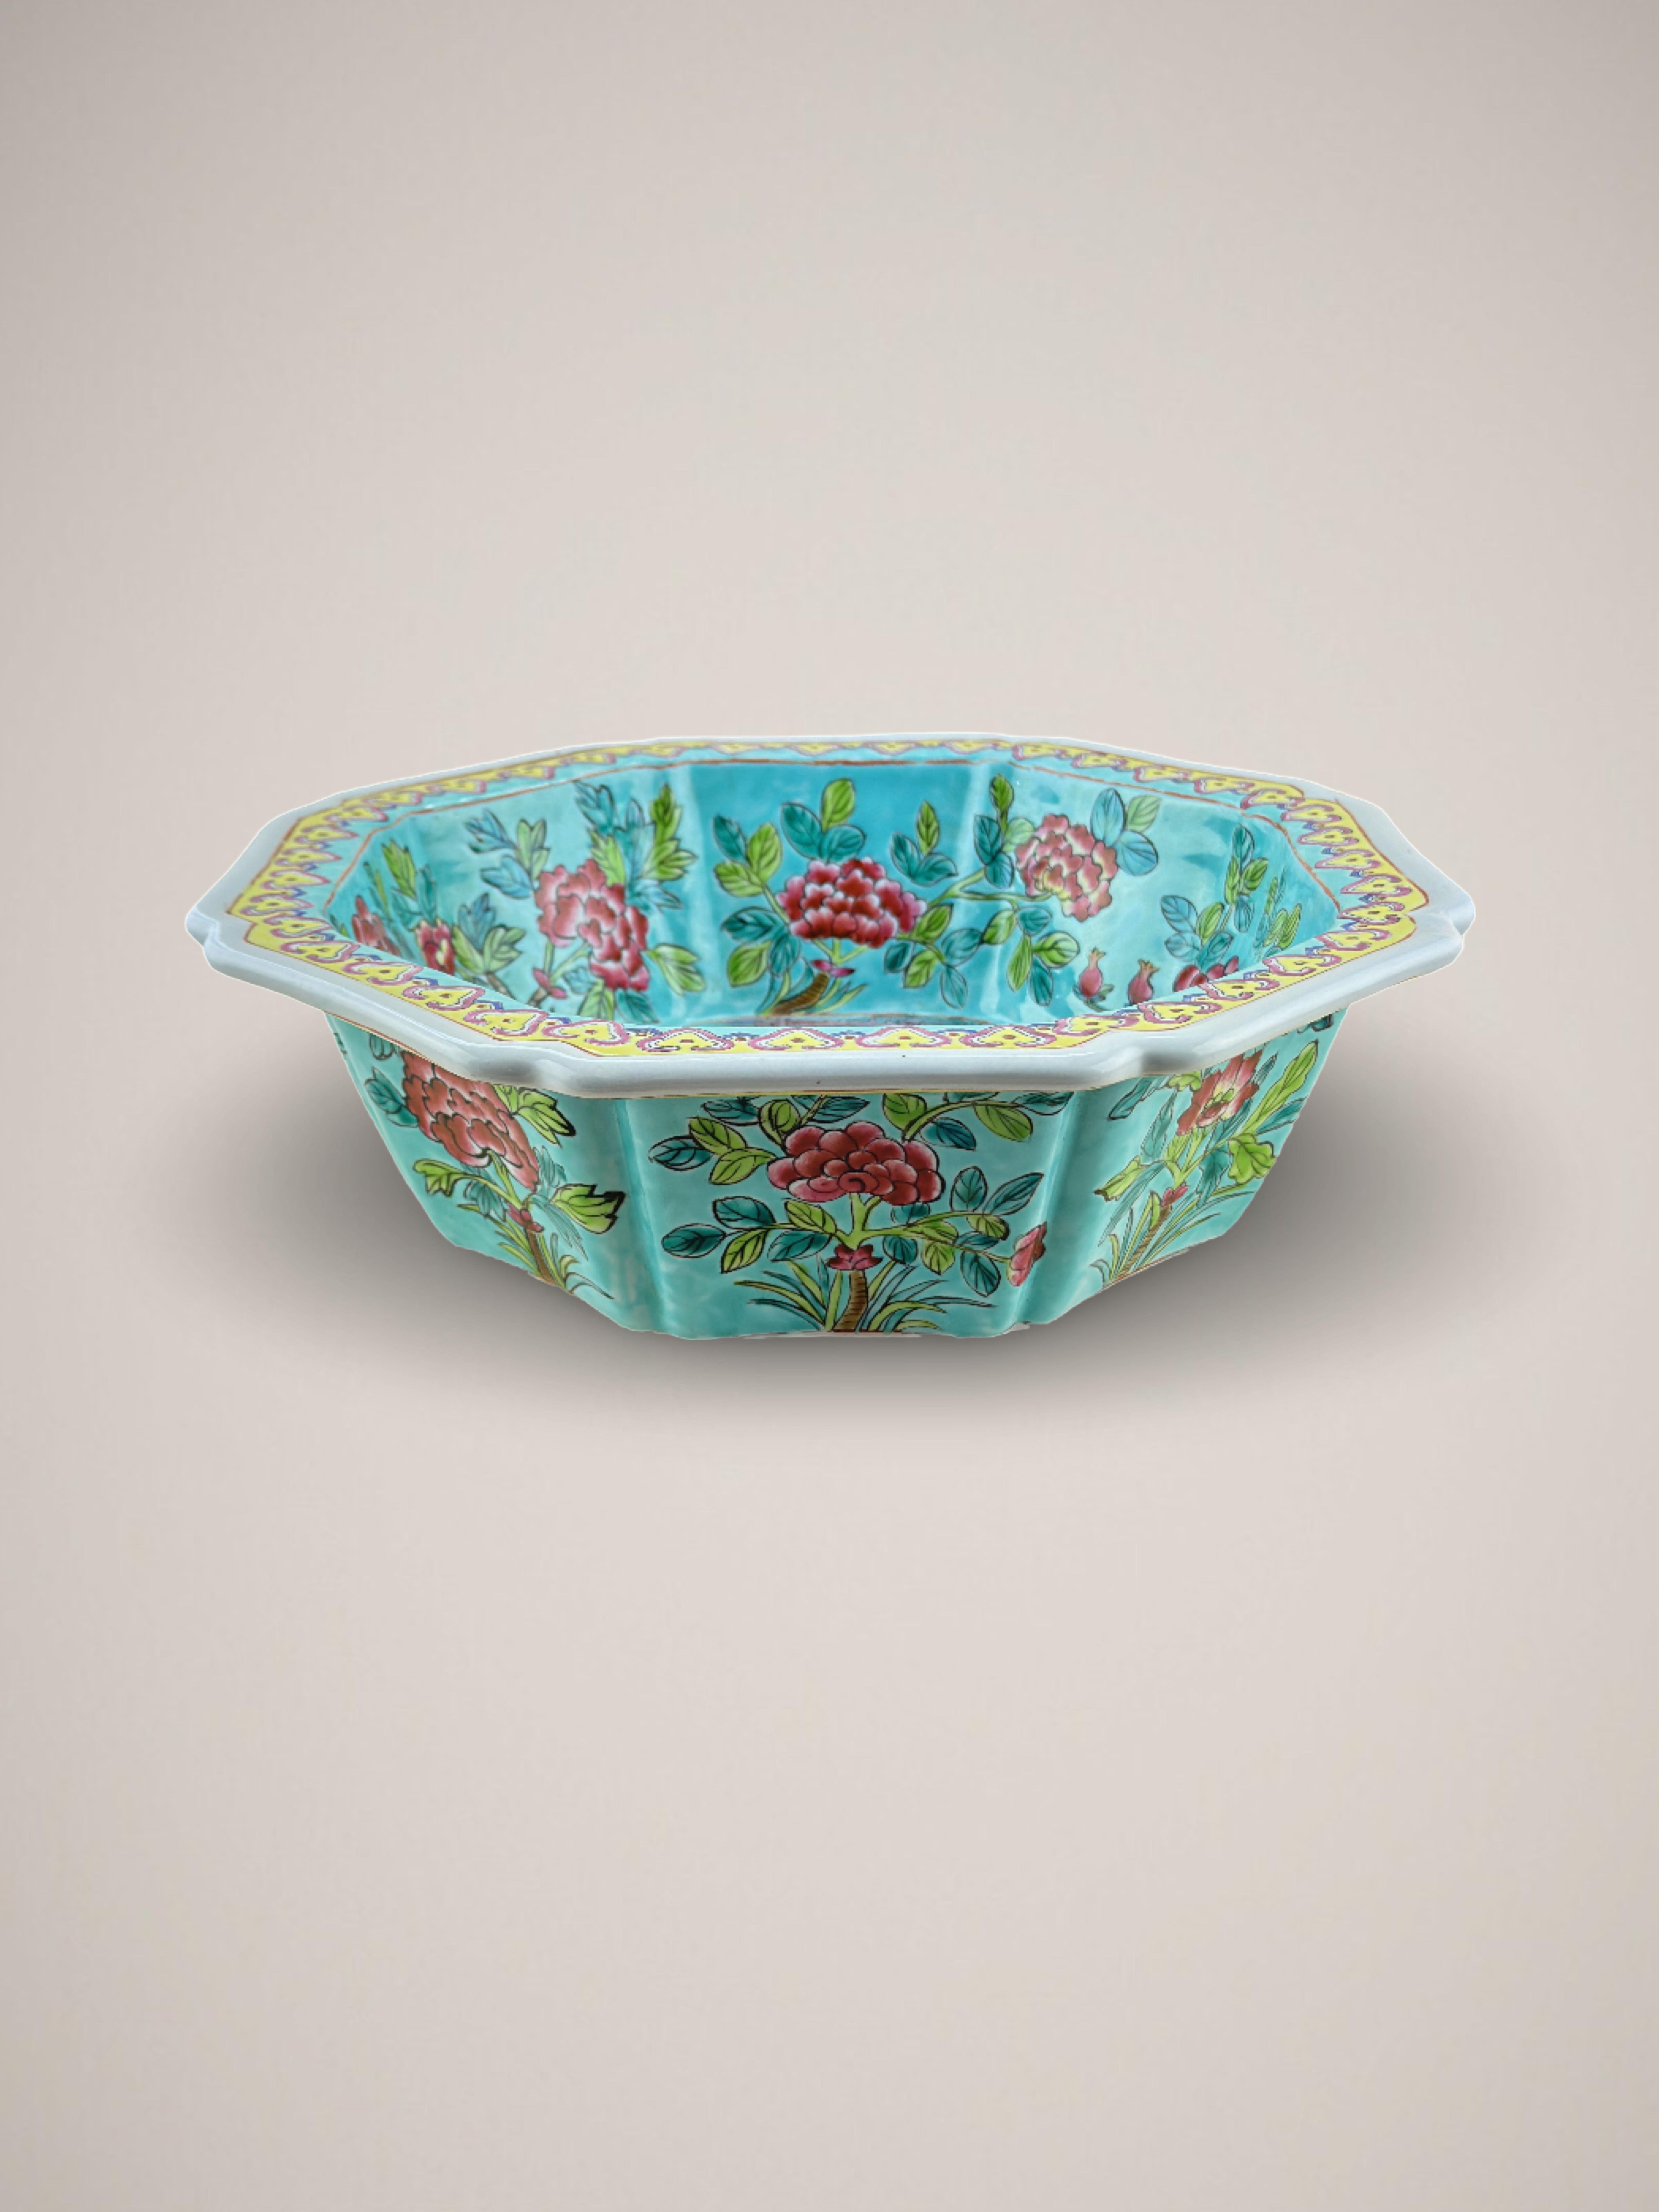 A colourful 'Straits style' ceremonial bowl. Made in China in the 1960s

Decorated in the Straits/Peranakan style, this eye-catching bowl is a wonderful representation of the highly sought after style.  An array of hues: turquoise, pink, yellow,